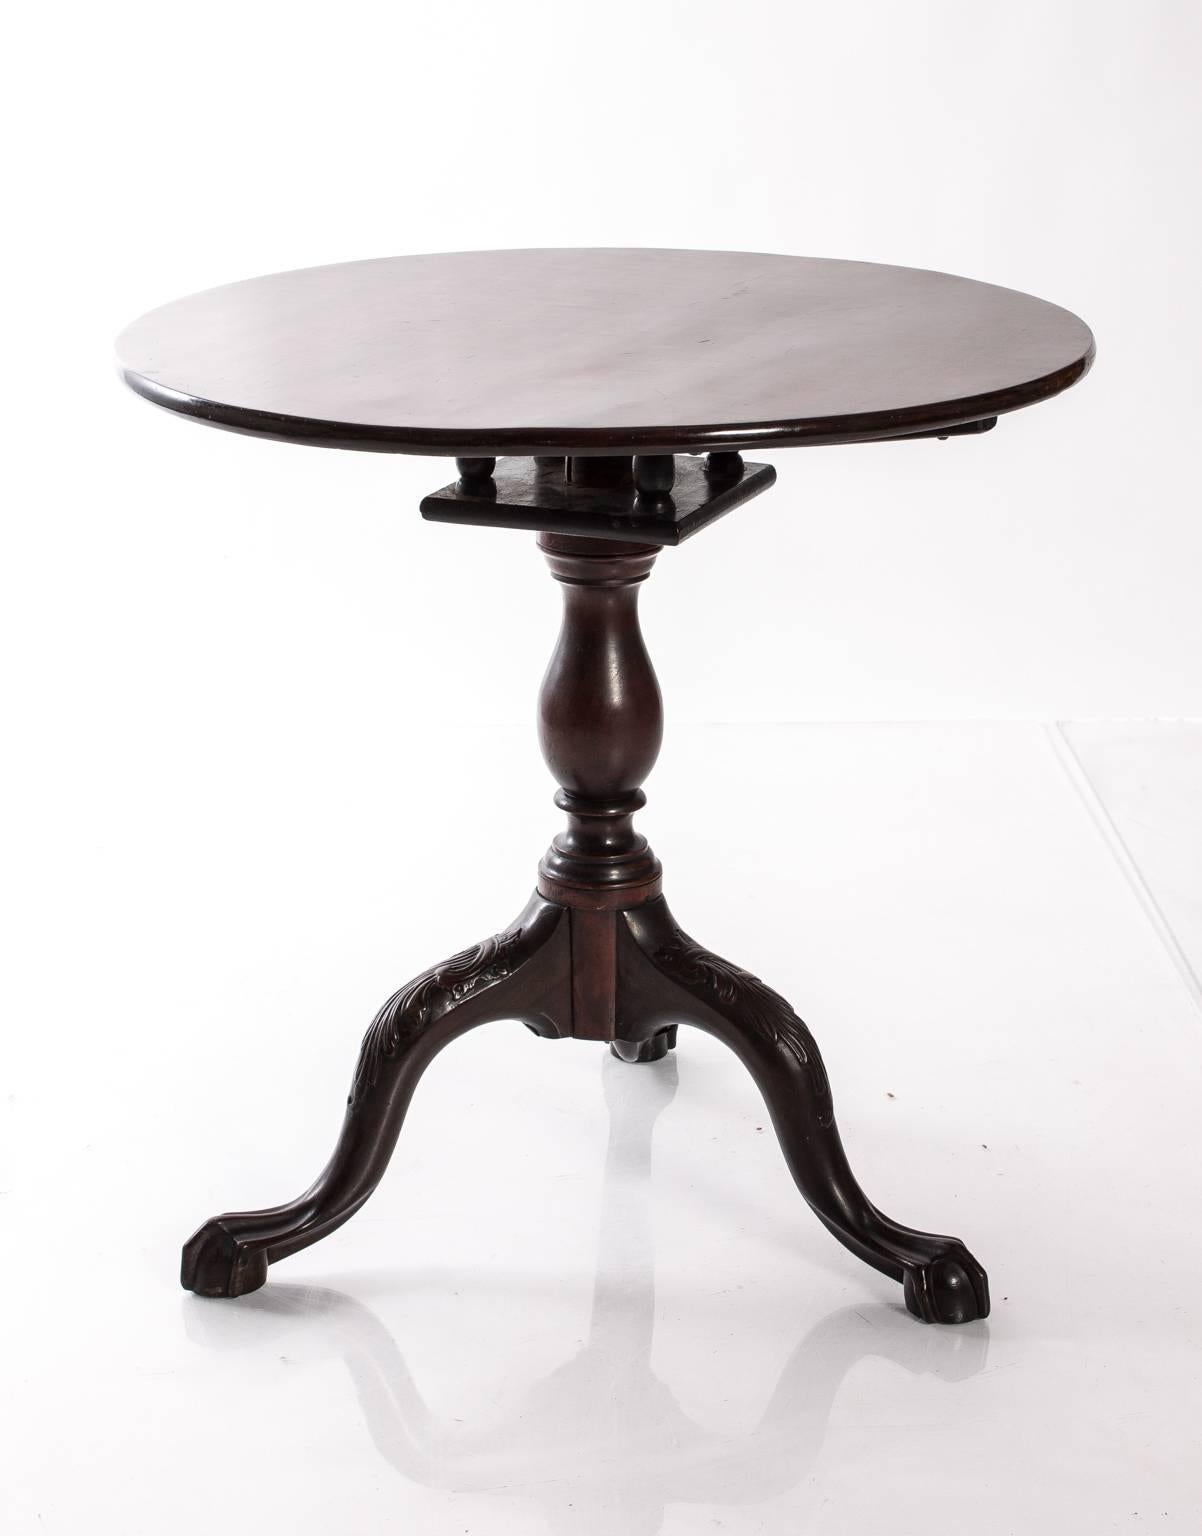 Mahogany flip-top table, 1800s or potentially earlier ball and claw.